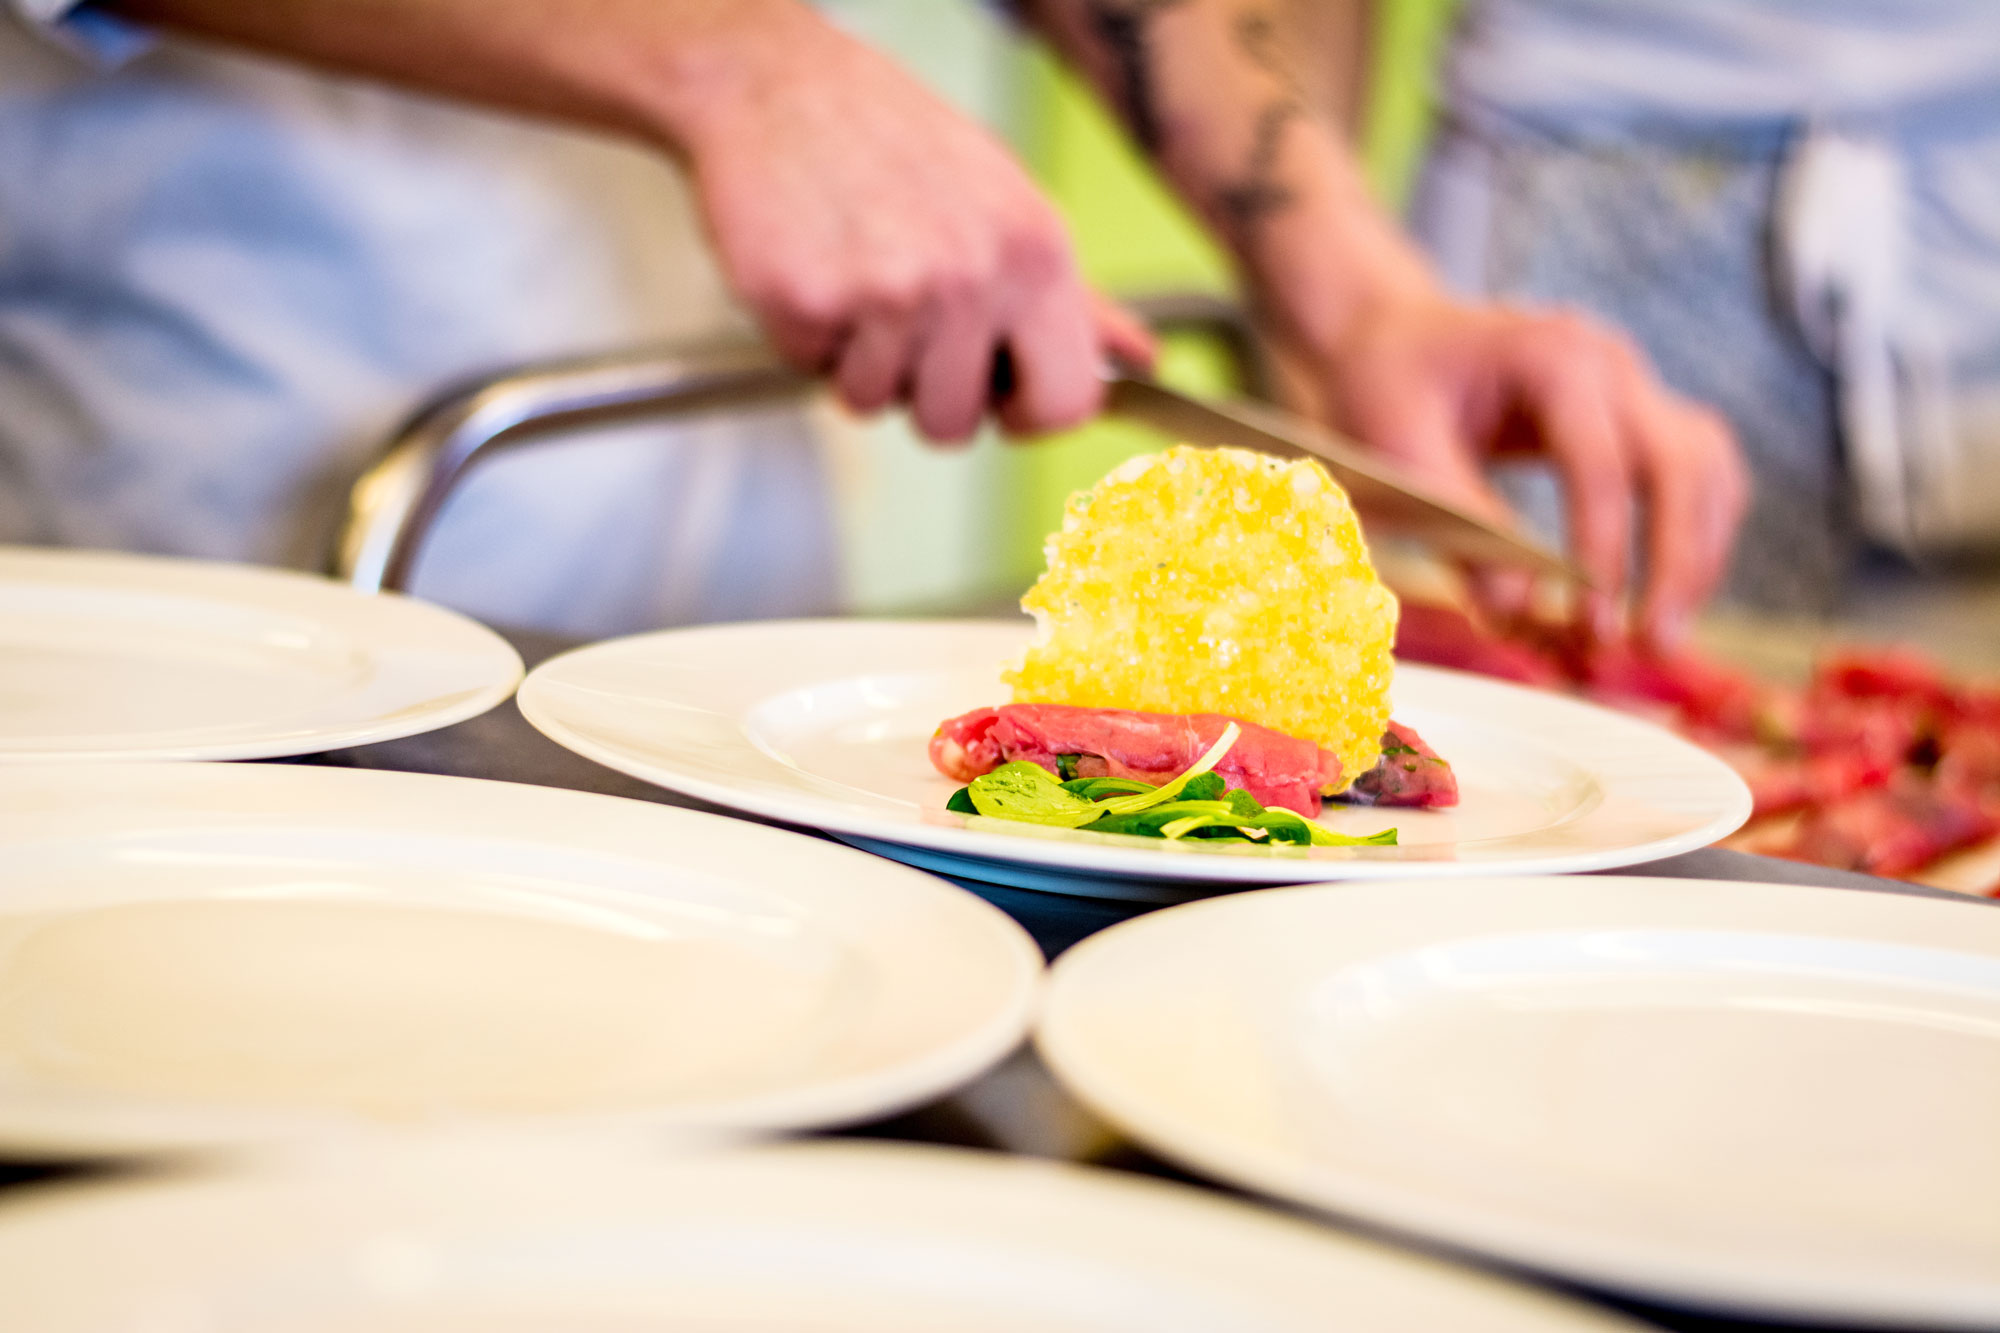 Can't Cook, but Love to Host? Hire a Local Chef or Professional Caterer